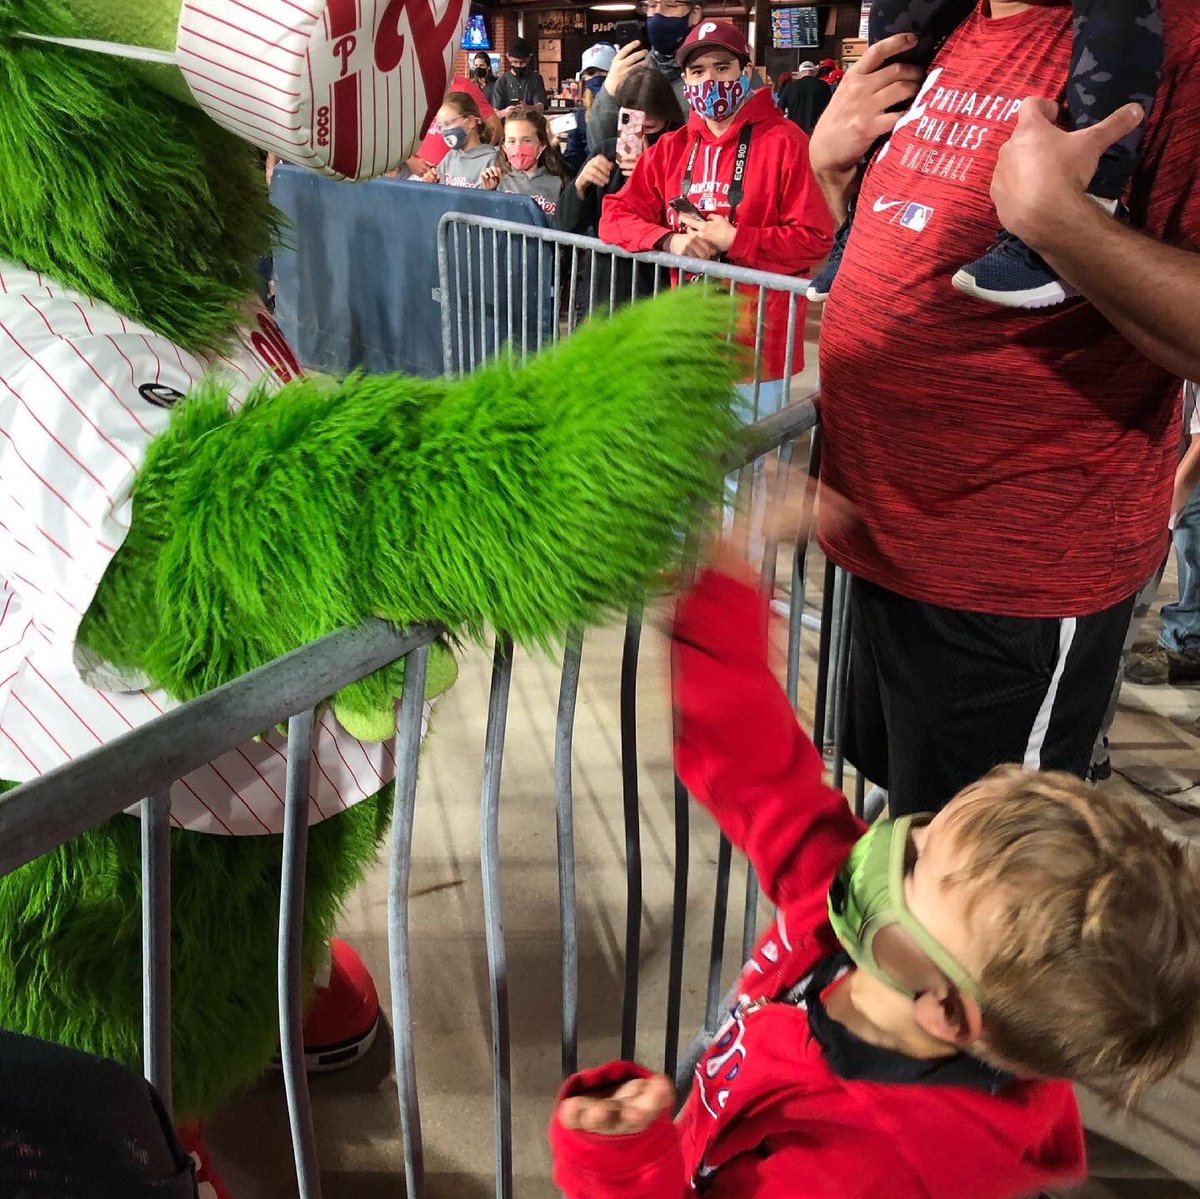 There is just something magical when the #philliephanatic gives your son a high five...I swear the smile still hasn’t left his face. @phillies @PhilliesCBP #ringthebell